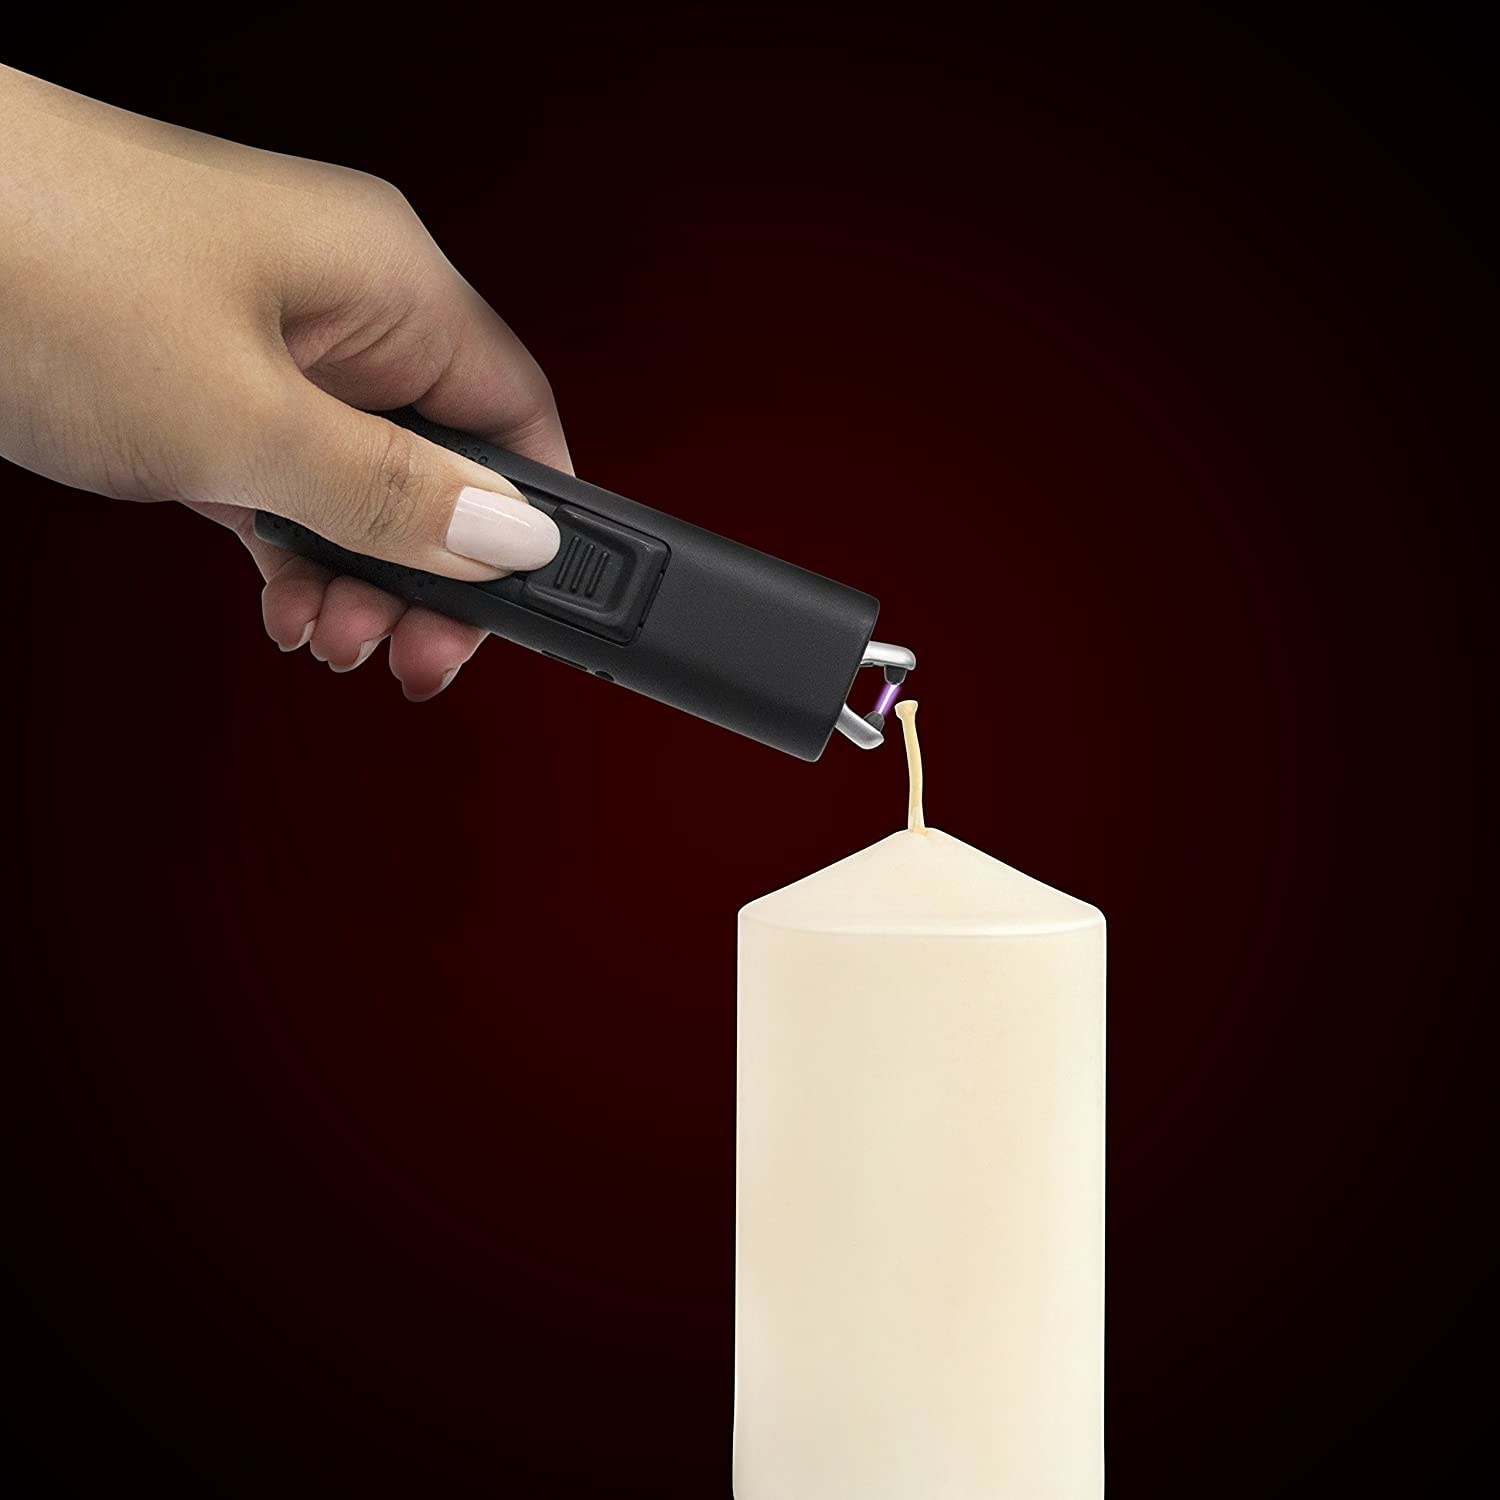 A person using the electric lighter to light a candle